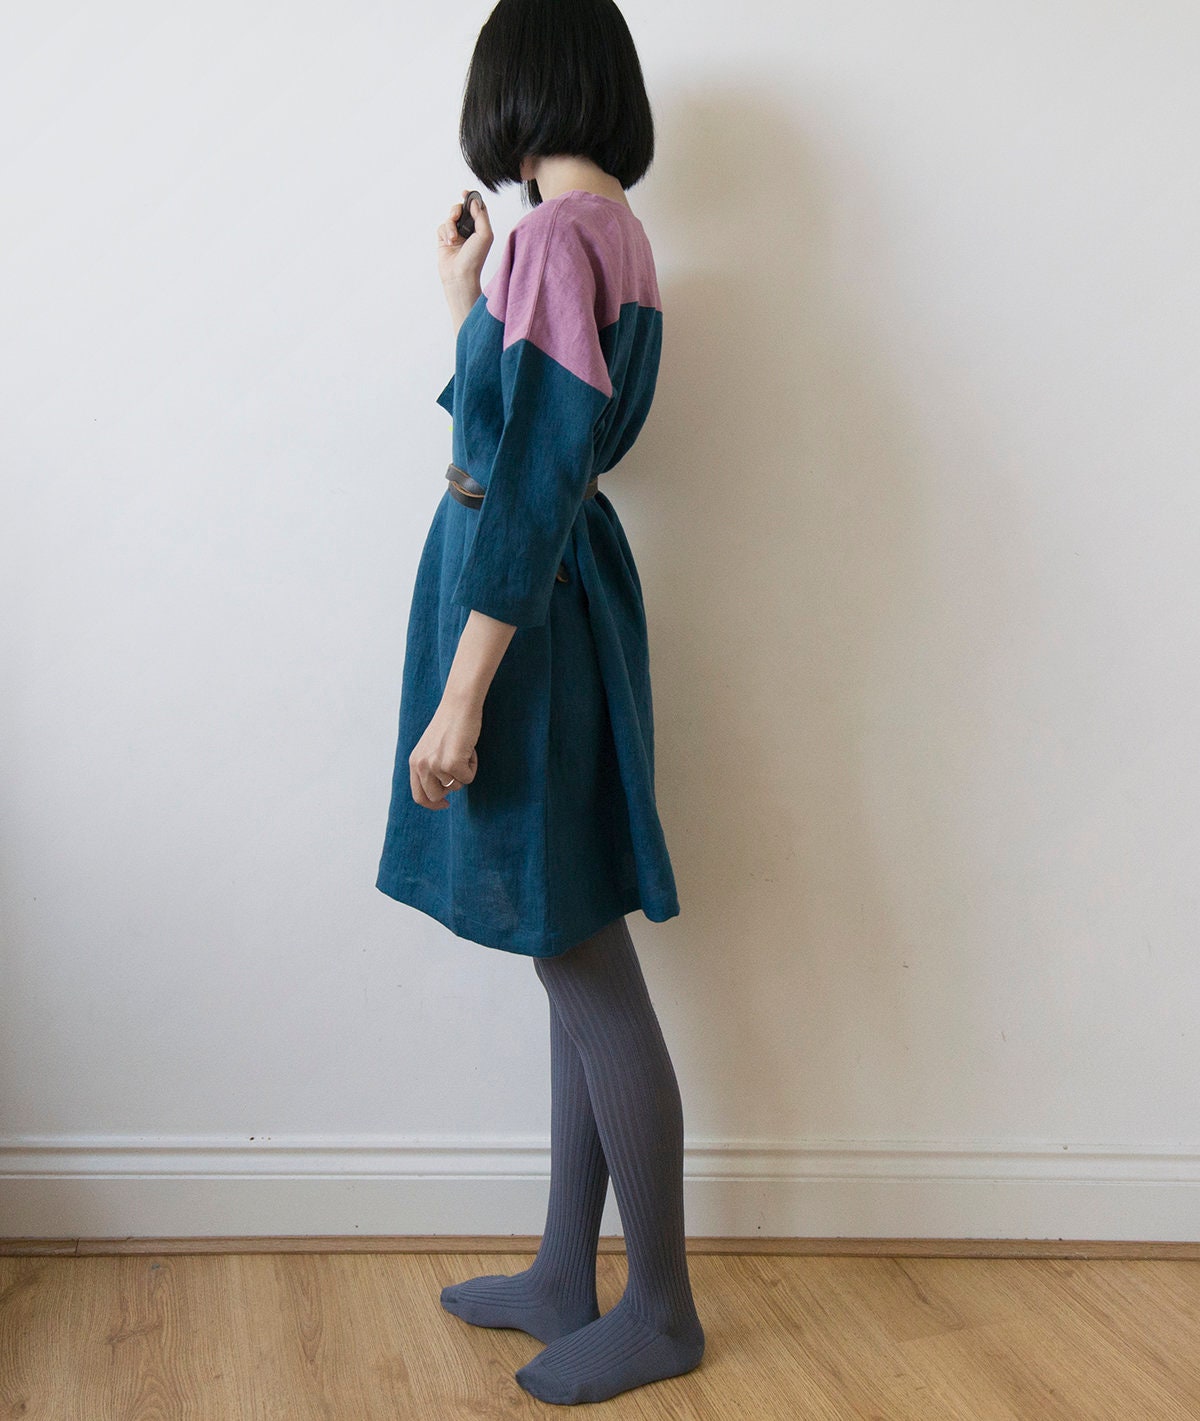 Wild orchid pink and dark teal blue linen dress